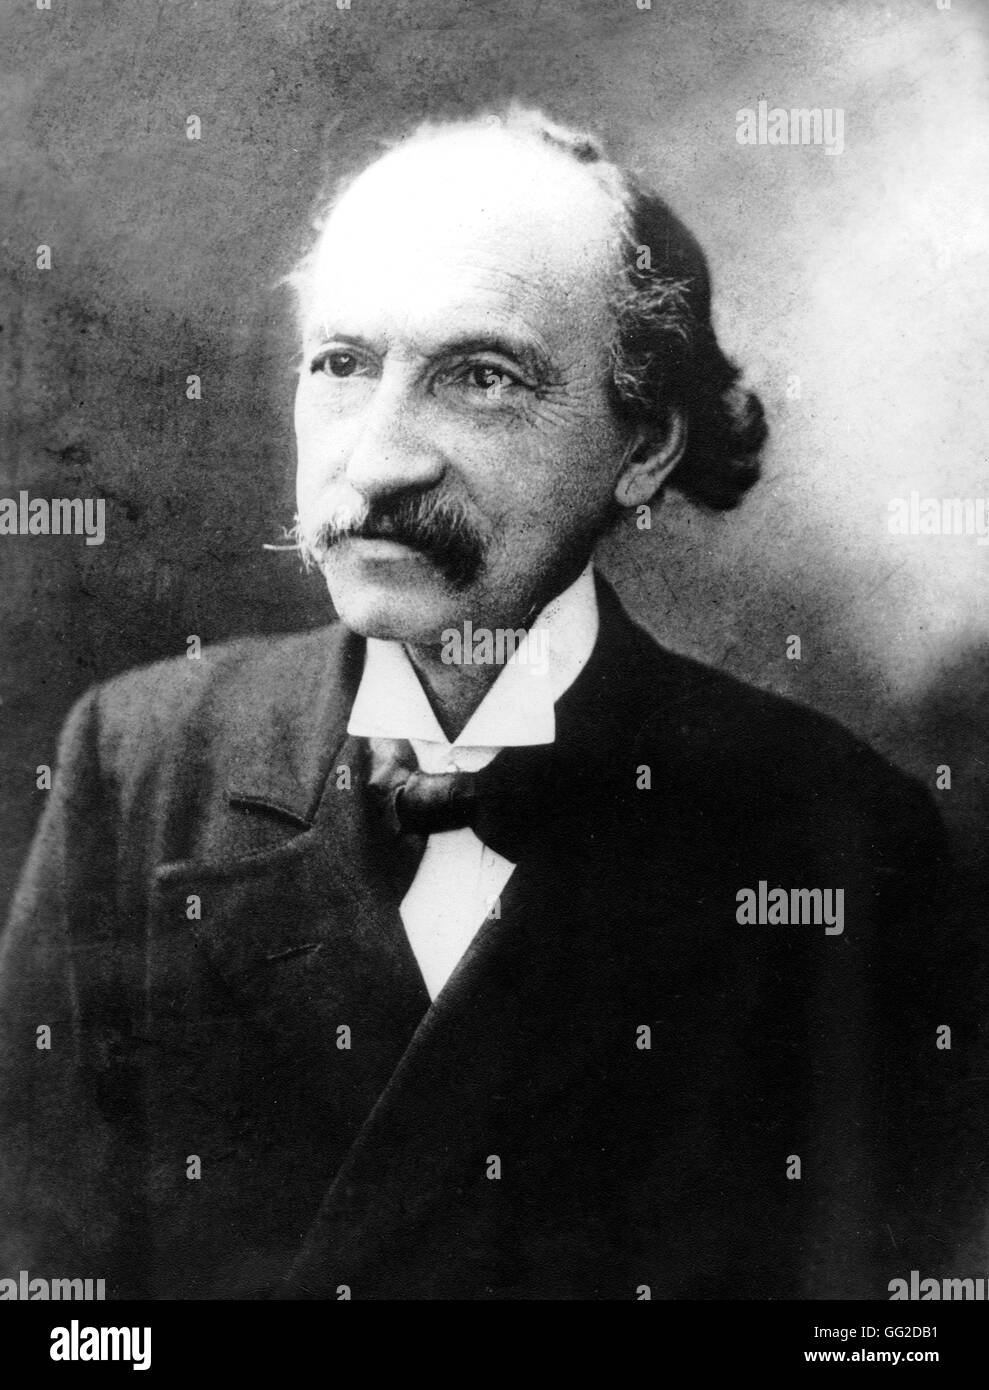 Charles Longuet (1839-1903), French socialist, member of the Association internationale des travailleurs (son-in-law of Karl Marx, husband of Jenny Marx) 19th century France Stock Photo